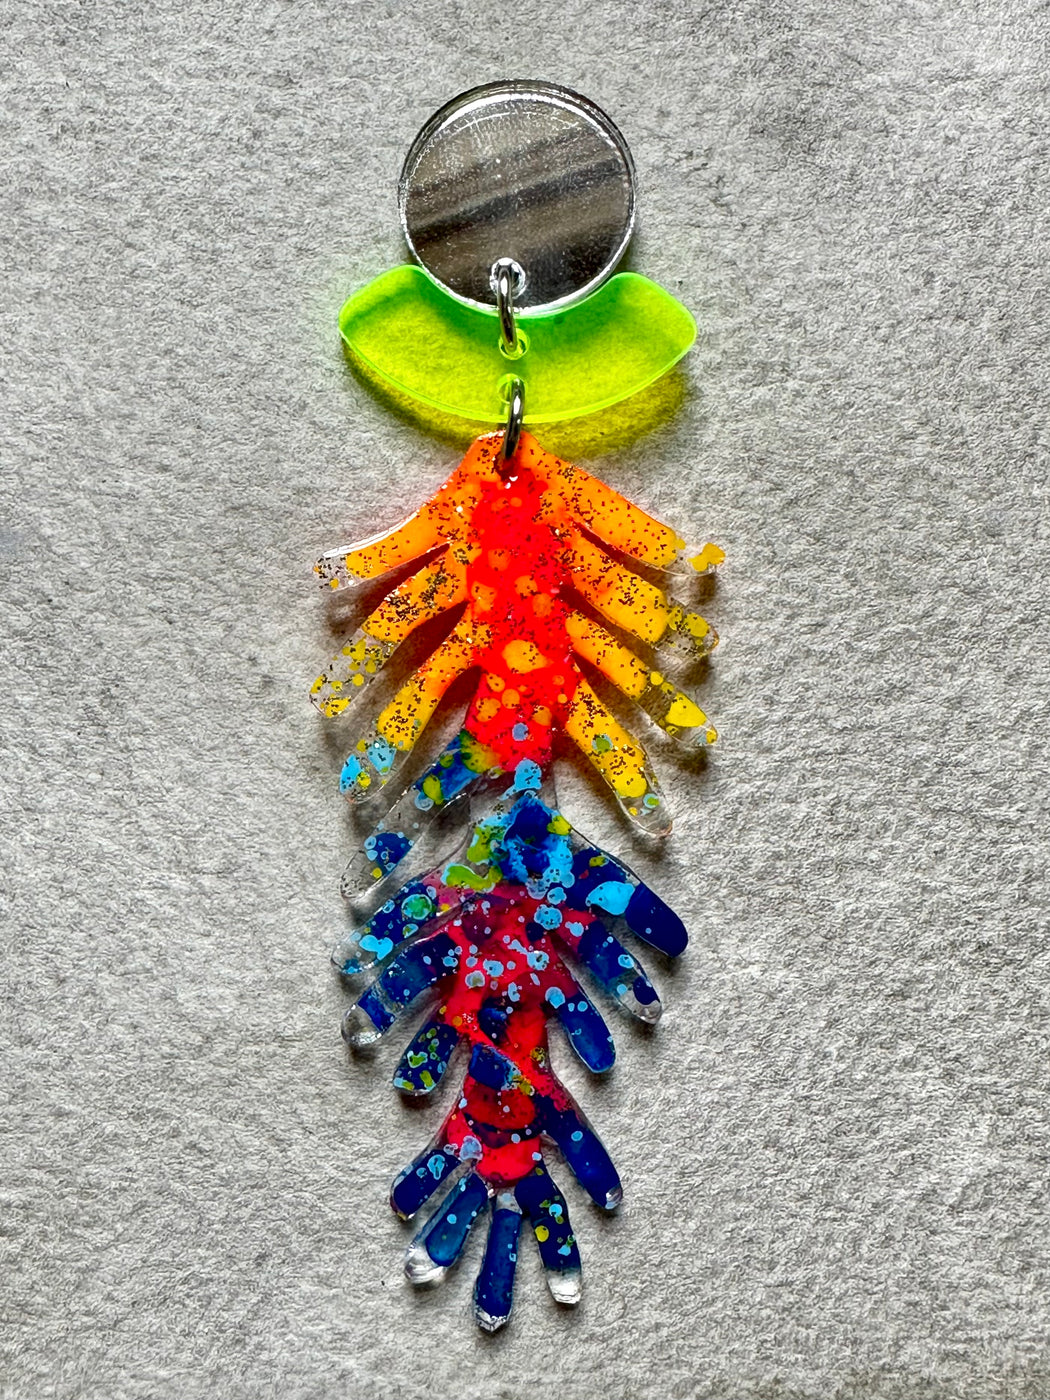 "Feather" Resin Earrings by Christina Misic